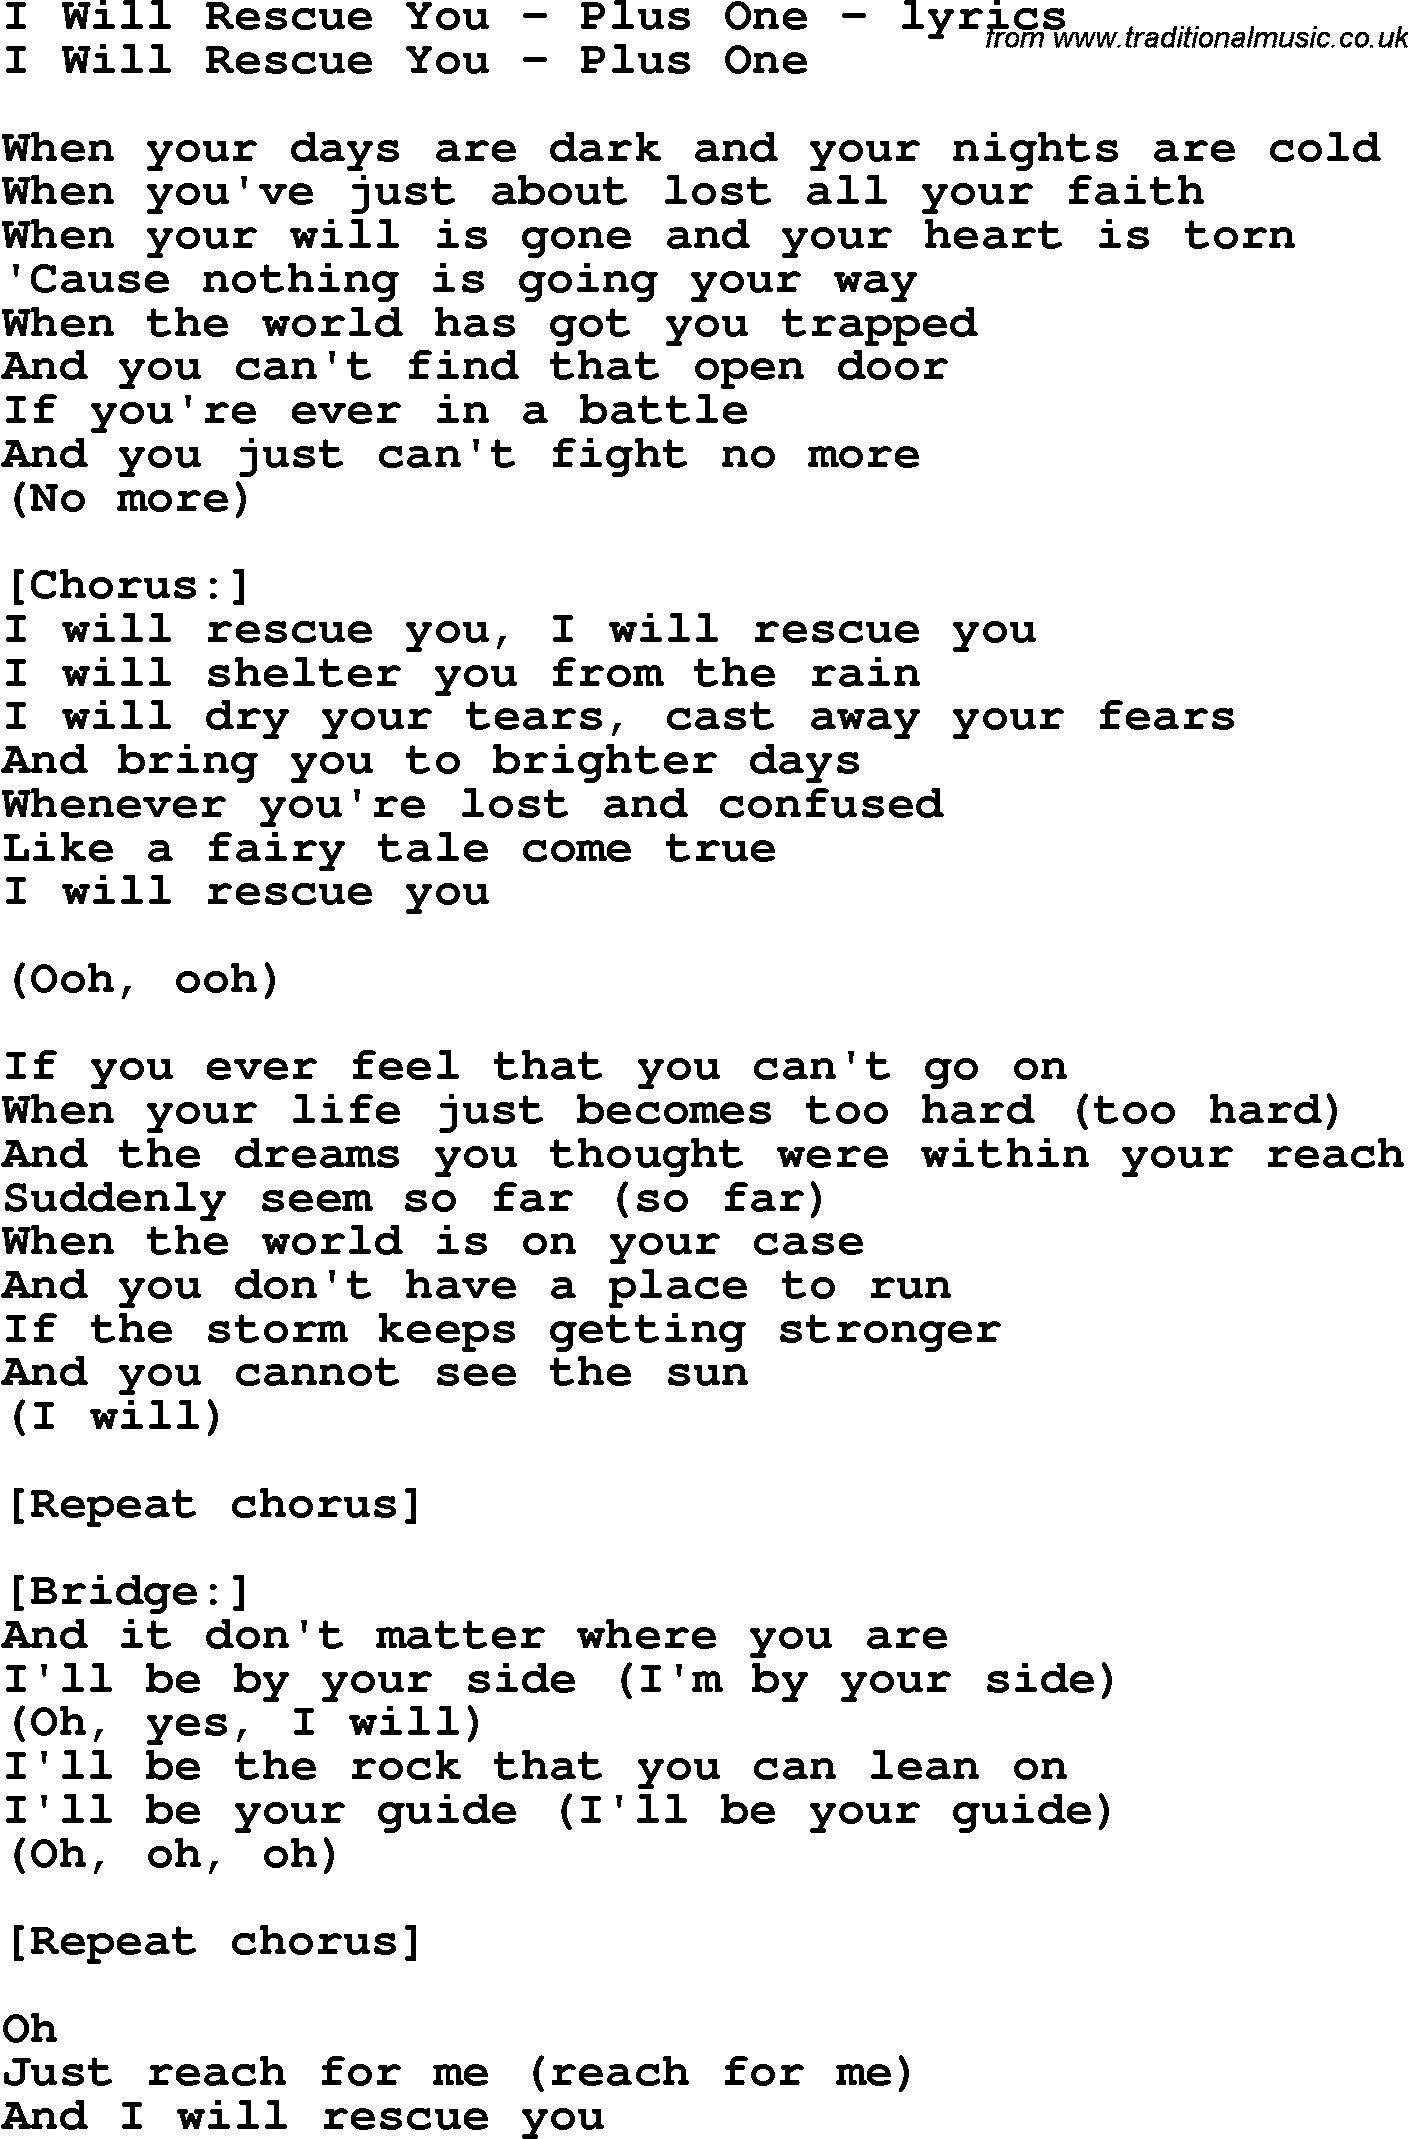 Love Song Lyrics for: I Will Rescue You - Plus One